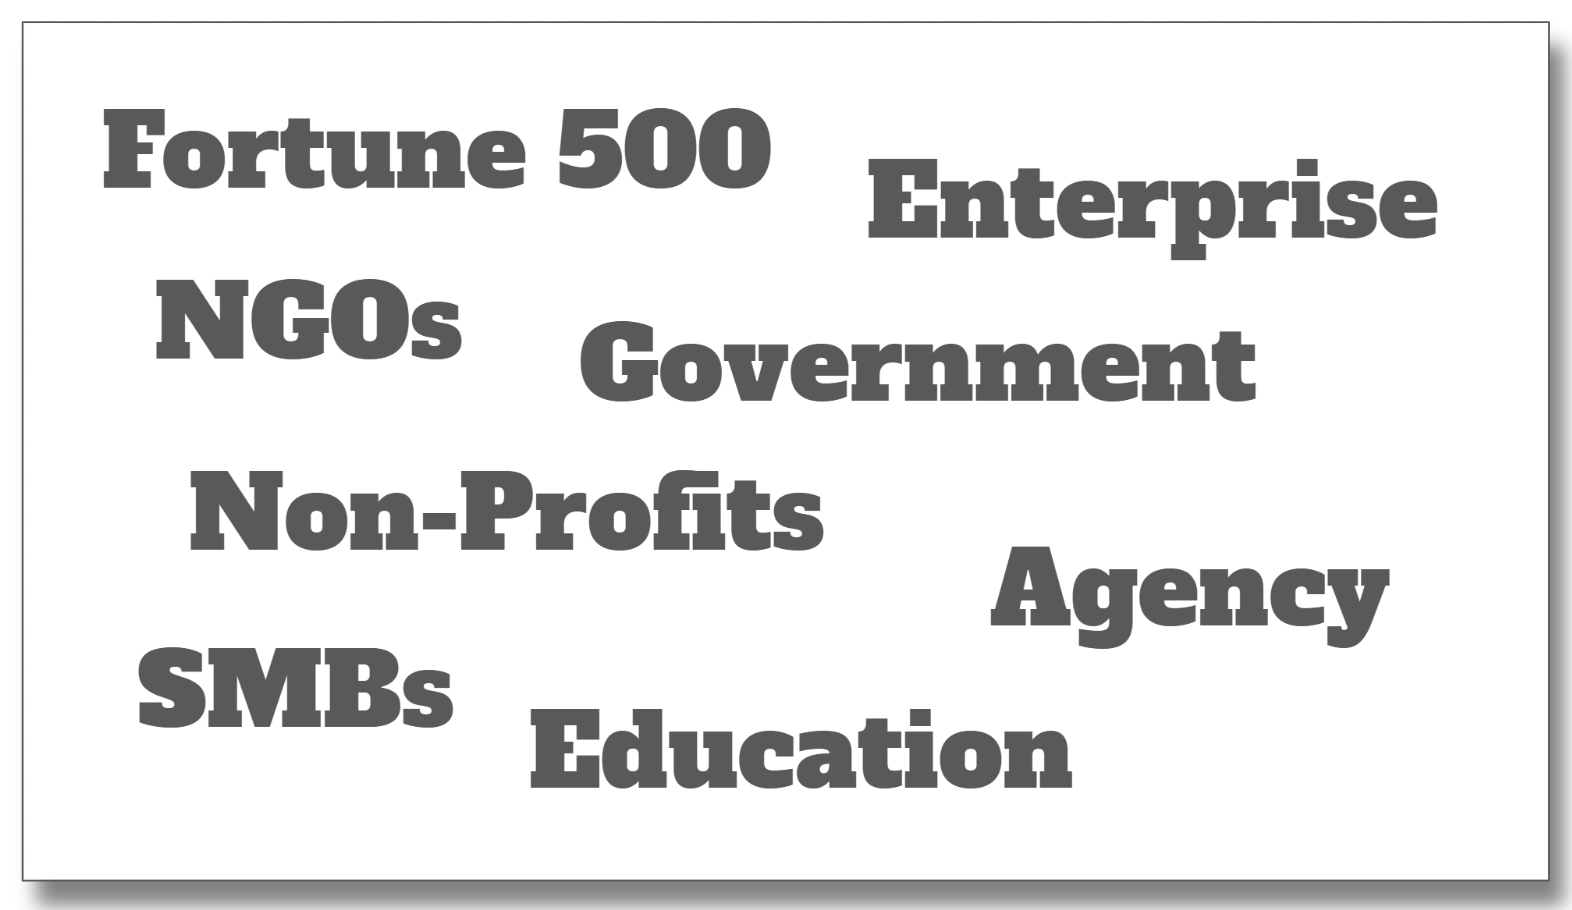 Fortune 500, Enterprise, NGOs, Government, Non-Profits, Agency, SMBs, Education.